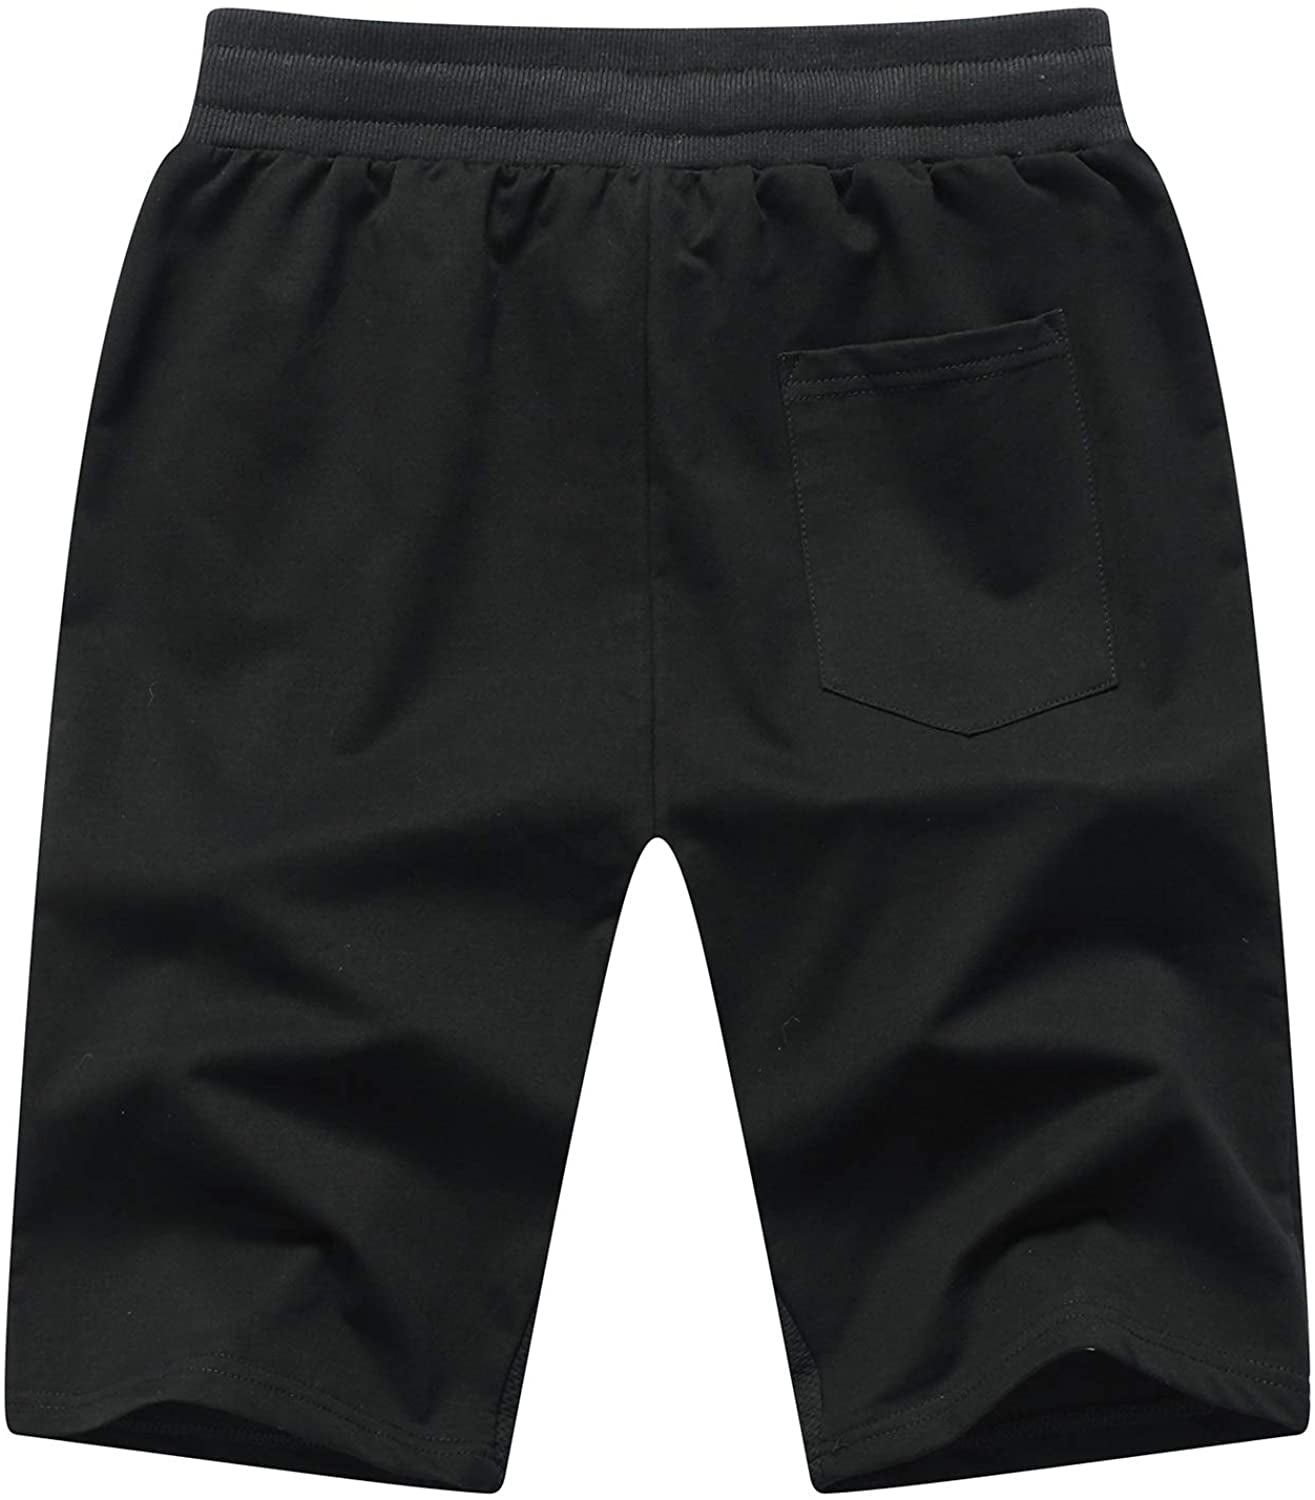 Mens Athletic Shorts with Zip Pockets